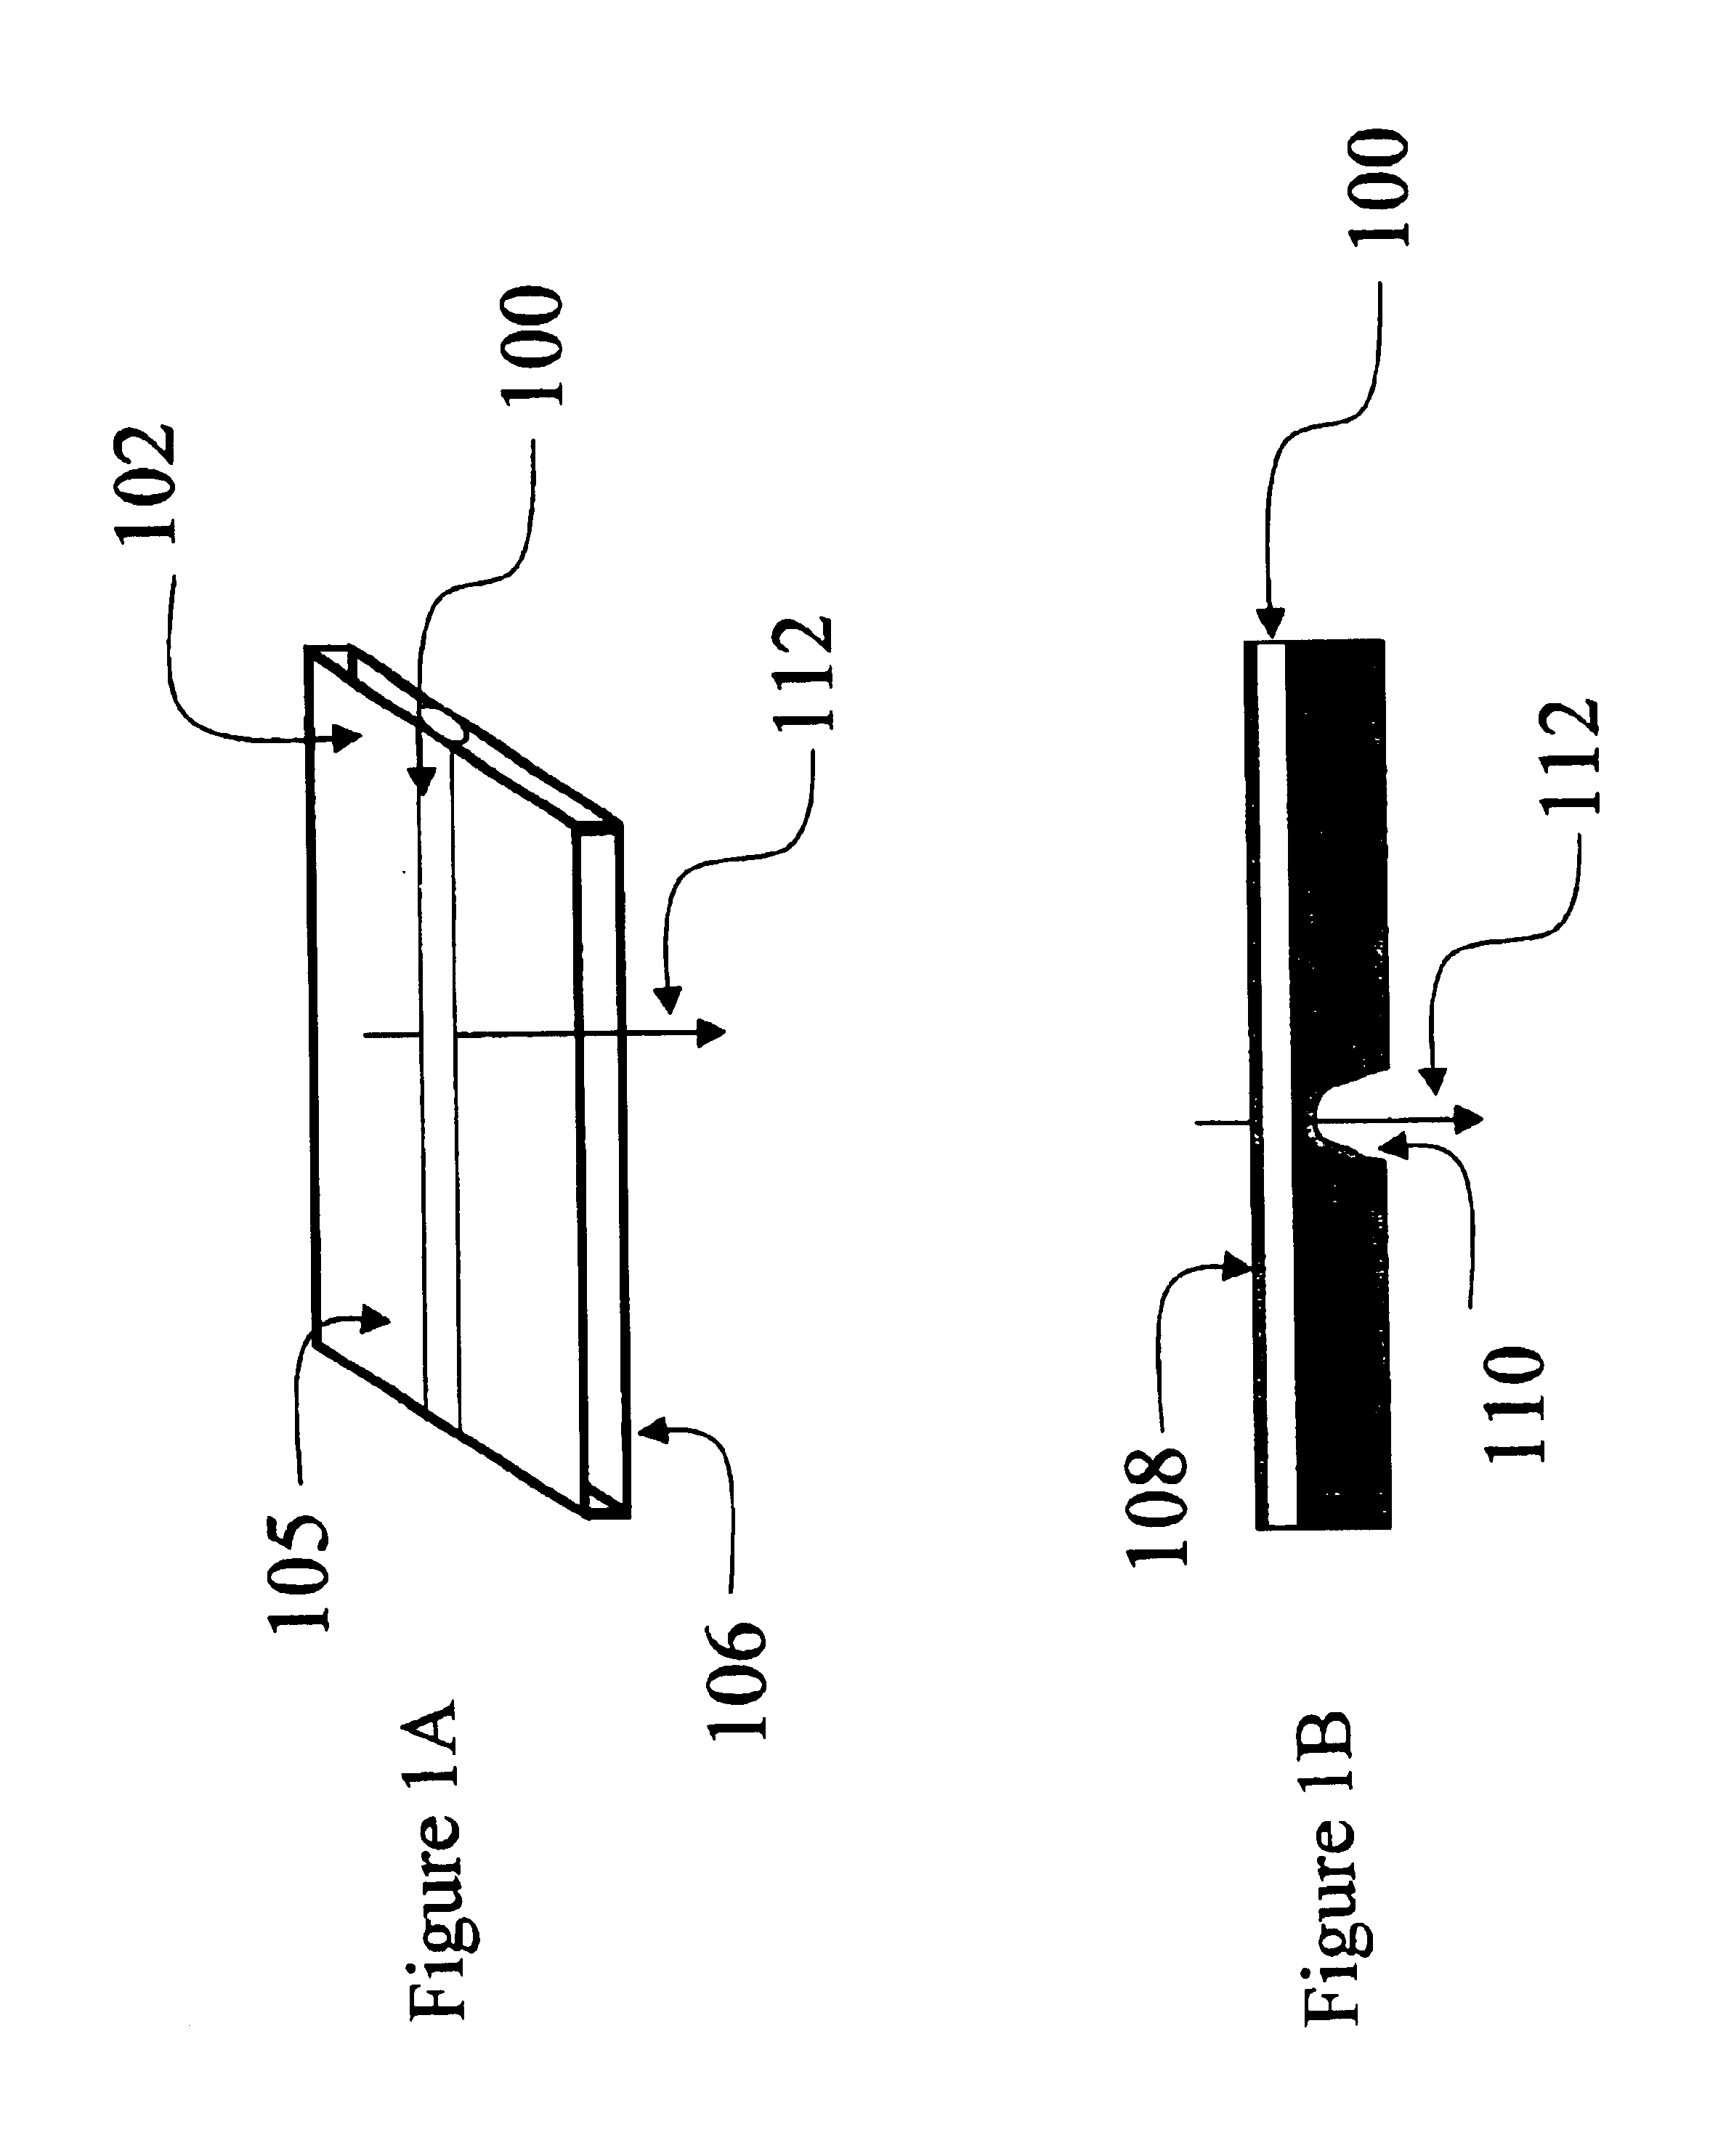 Microfluidic device for parallel delivery and mixing of fluids